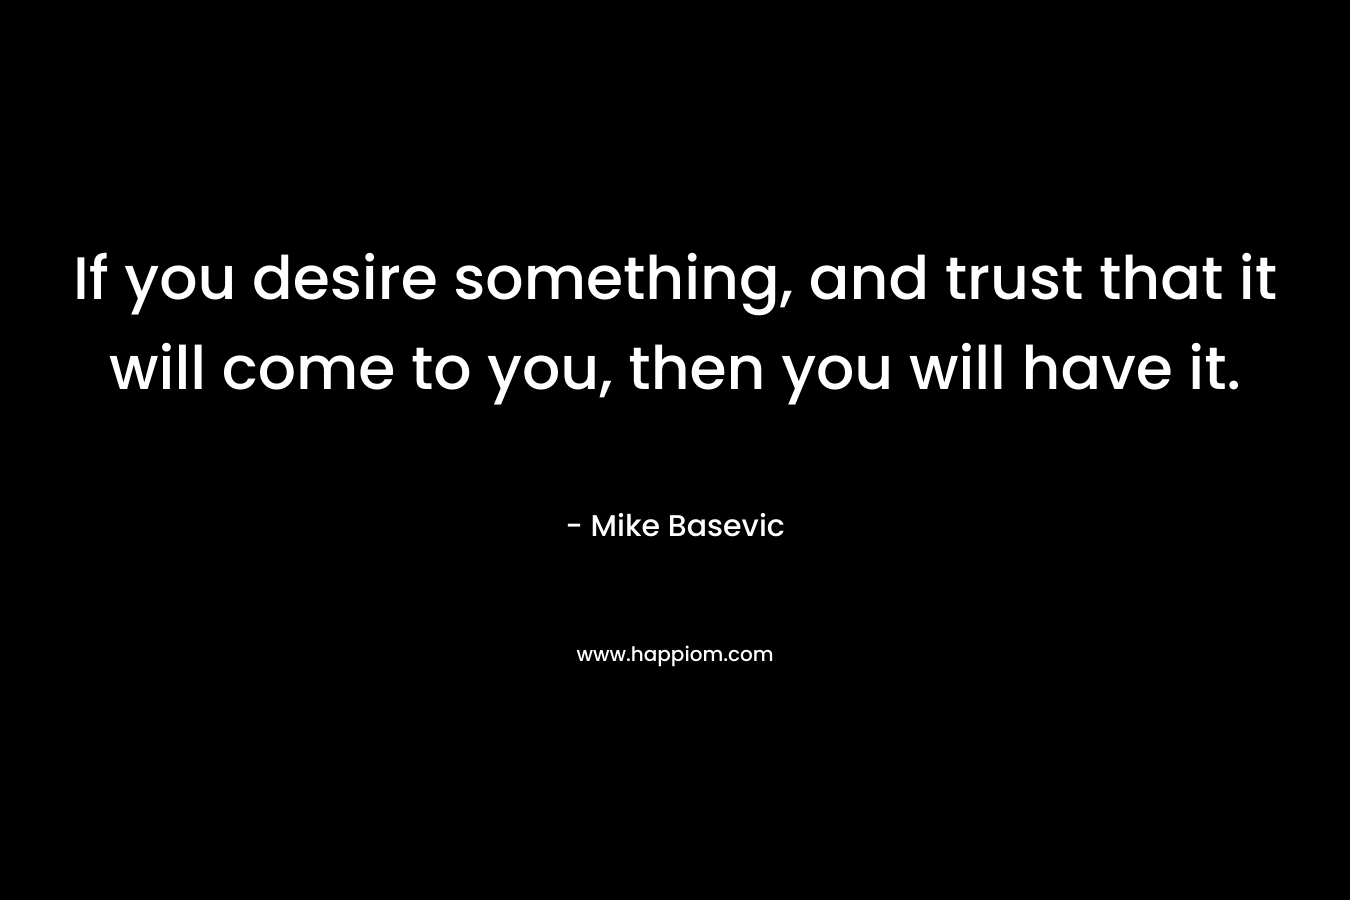 If you desire something, and trust that it will come to you, then you will have it.